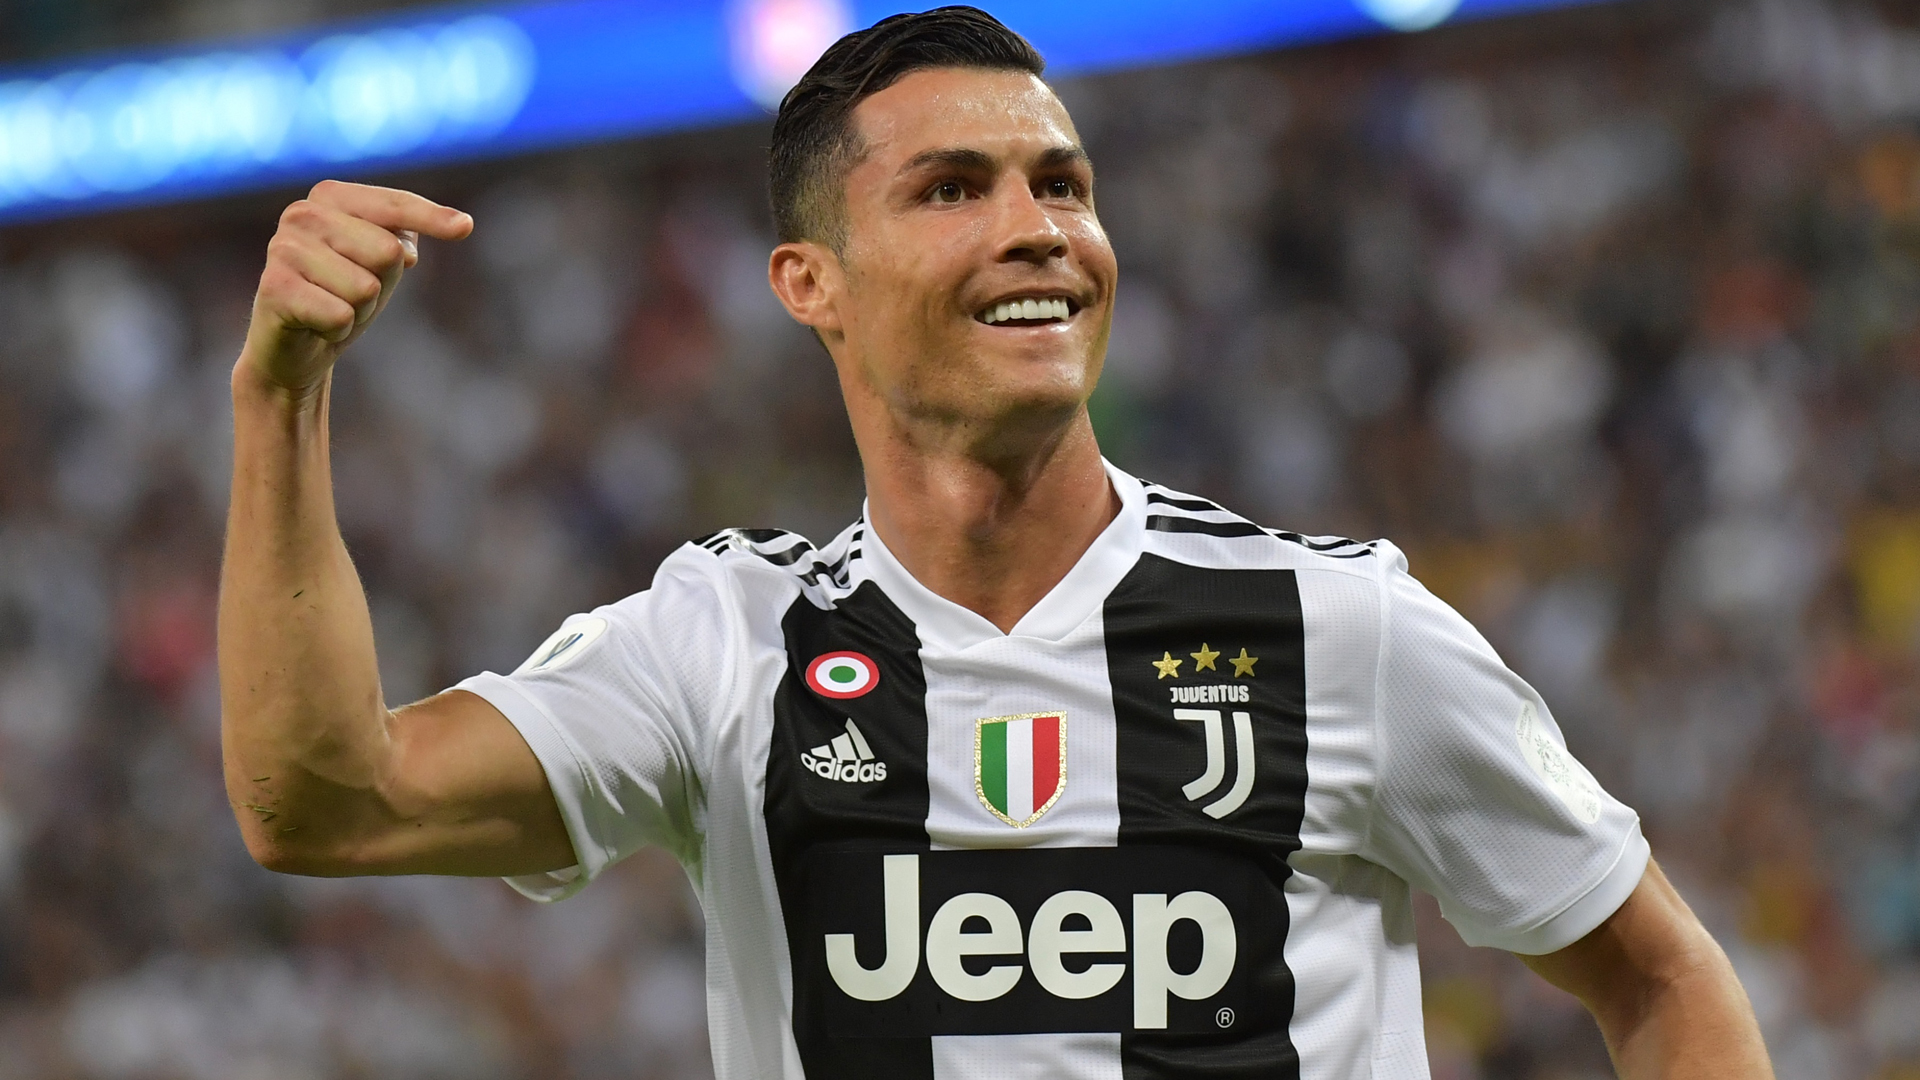 Juventus coach, Allegri reacts to Cristiano Ronaldo’s penalty miss against Chievo